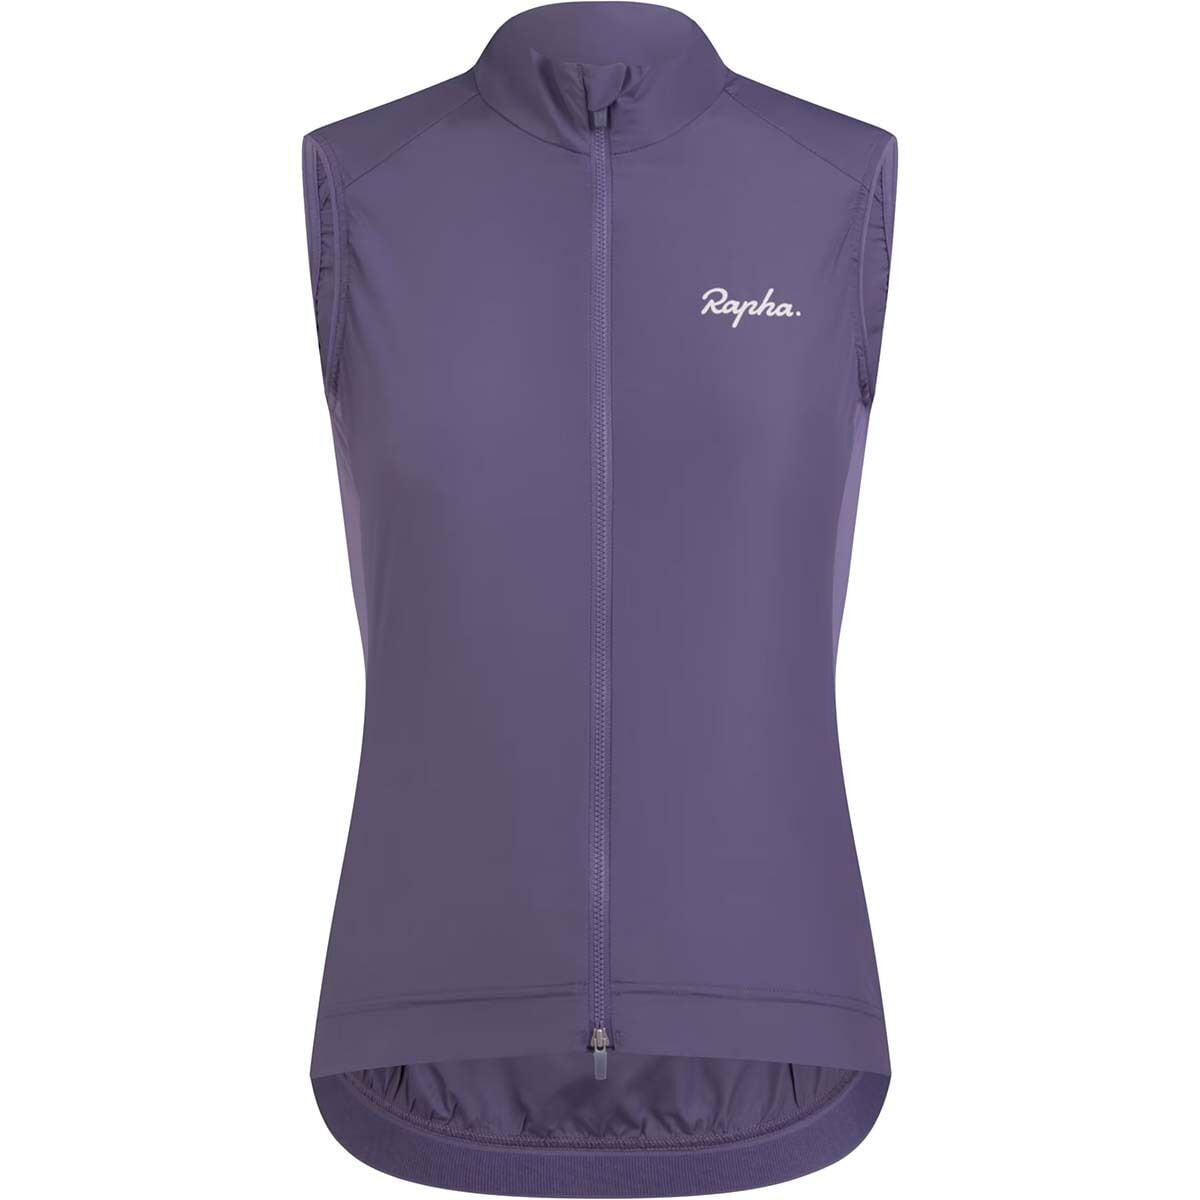 Rapha Core Gilet - Women's Dusted Lilac/White, M